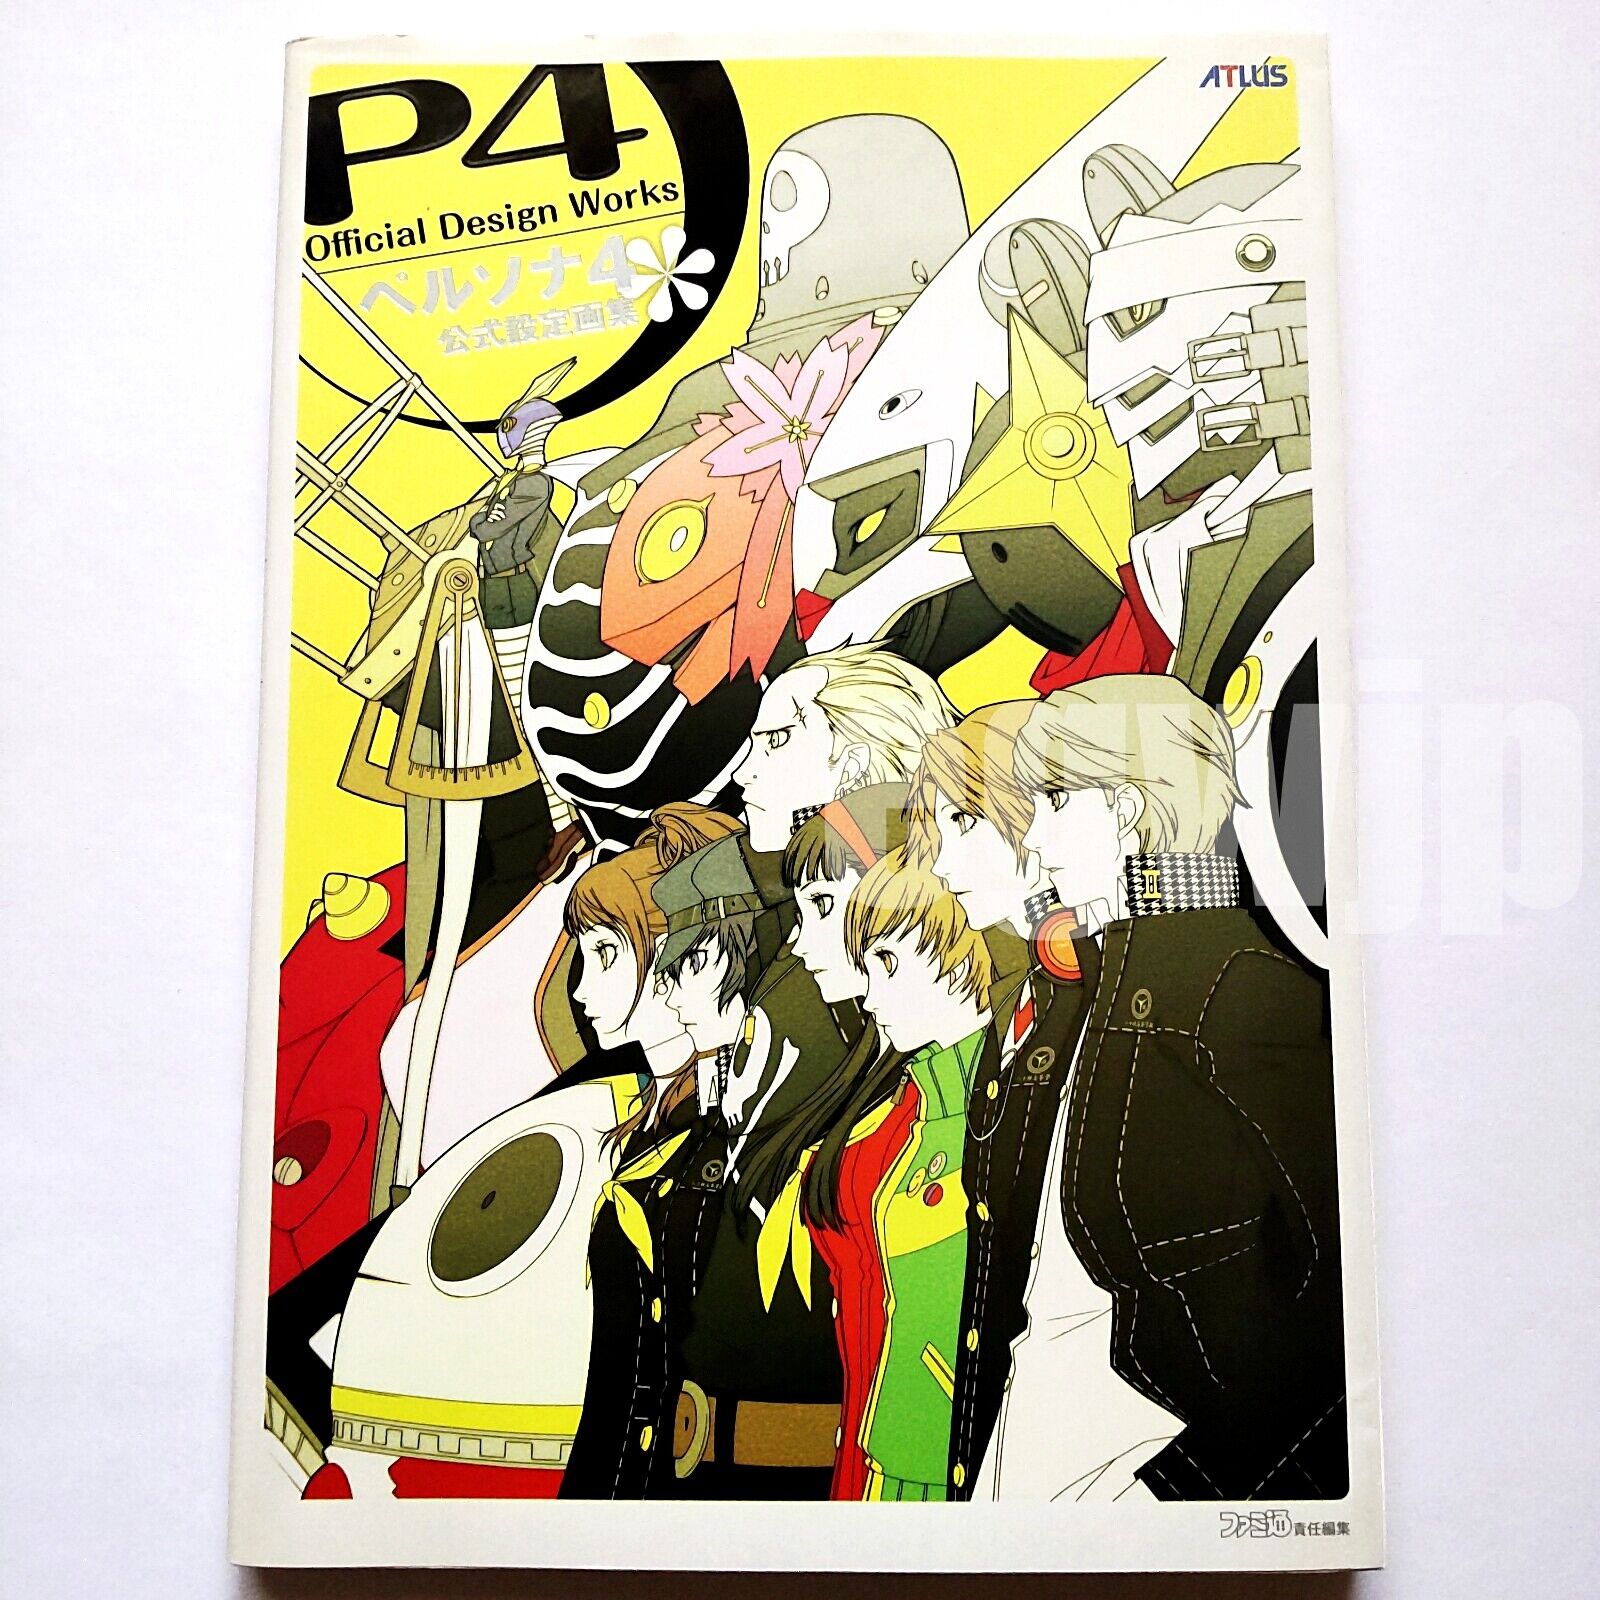 Persona 4 Official Design Works Atlus art book